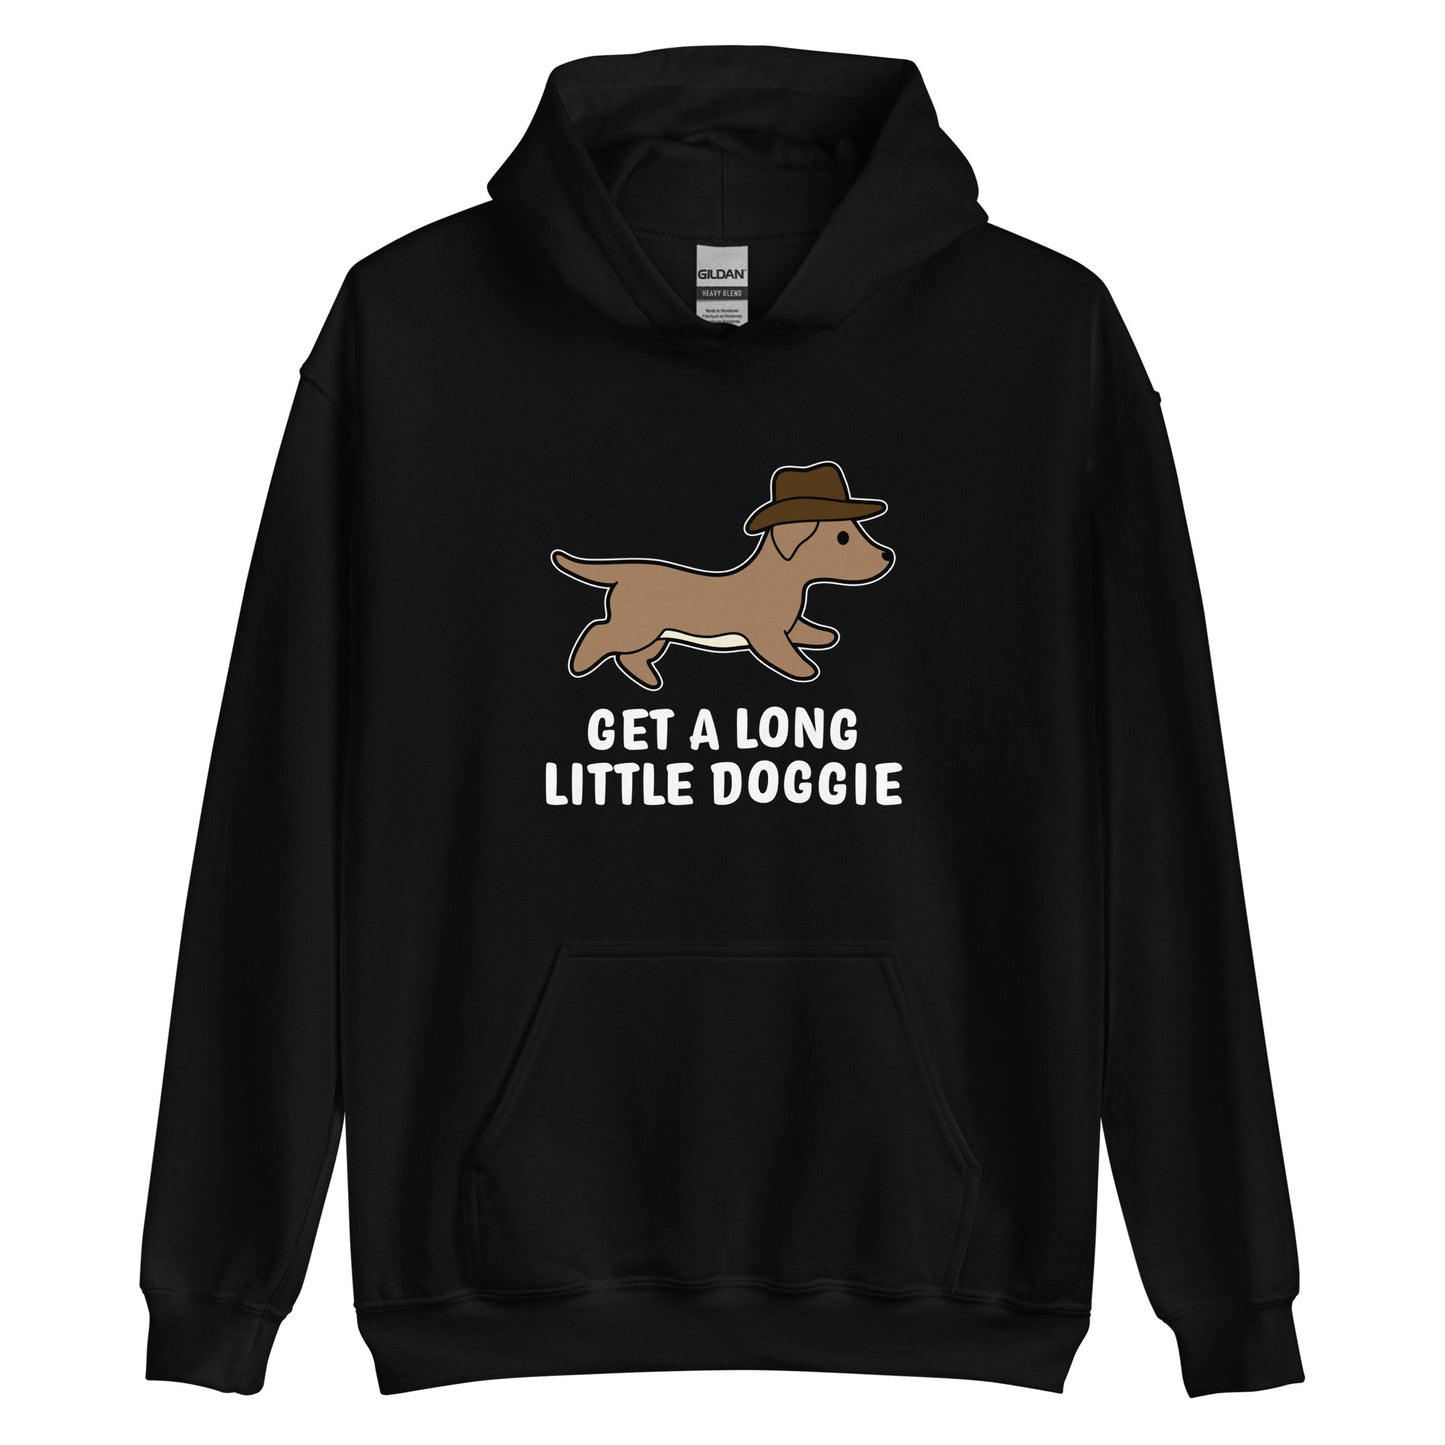 Black hooded sweatshirt featuring an image of a dachshund wearing a cowboy hat. Text below the dog reads "Get a long little doggie"